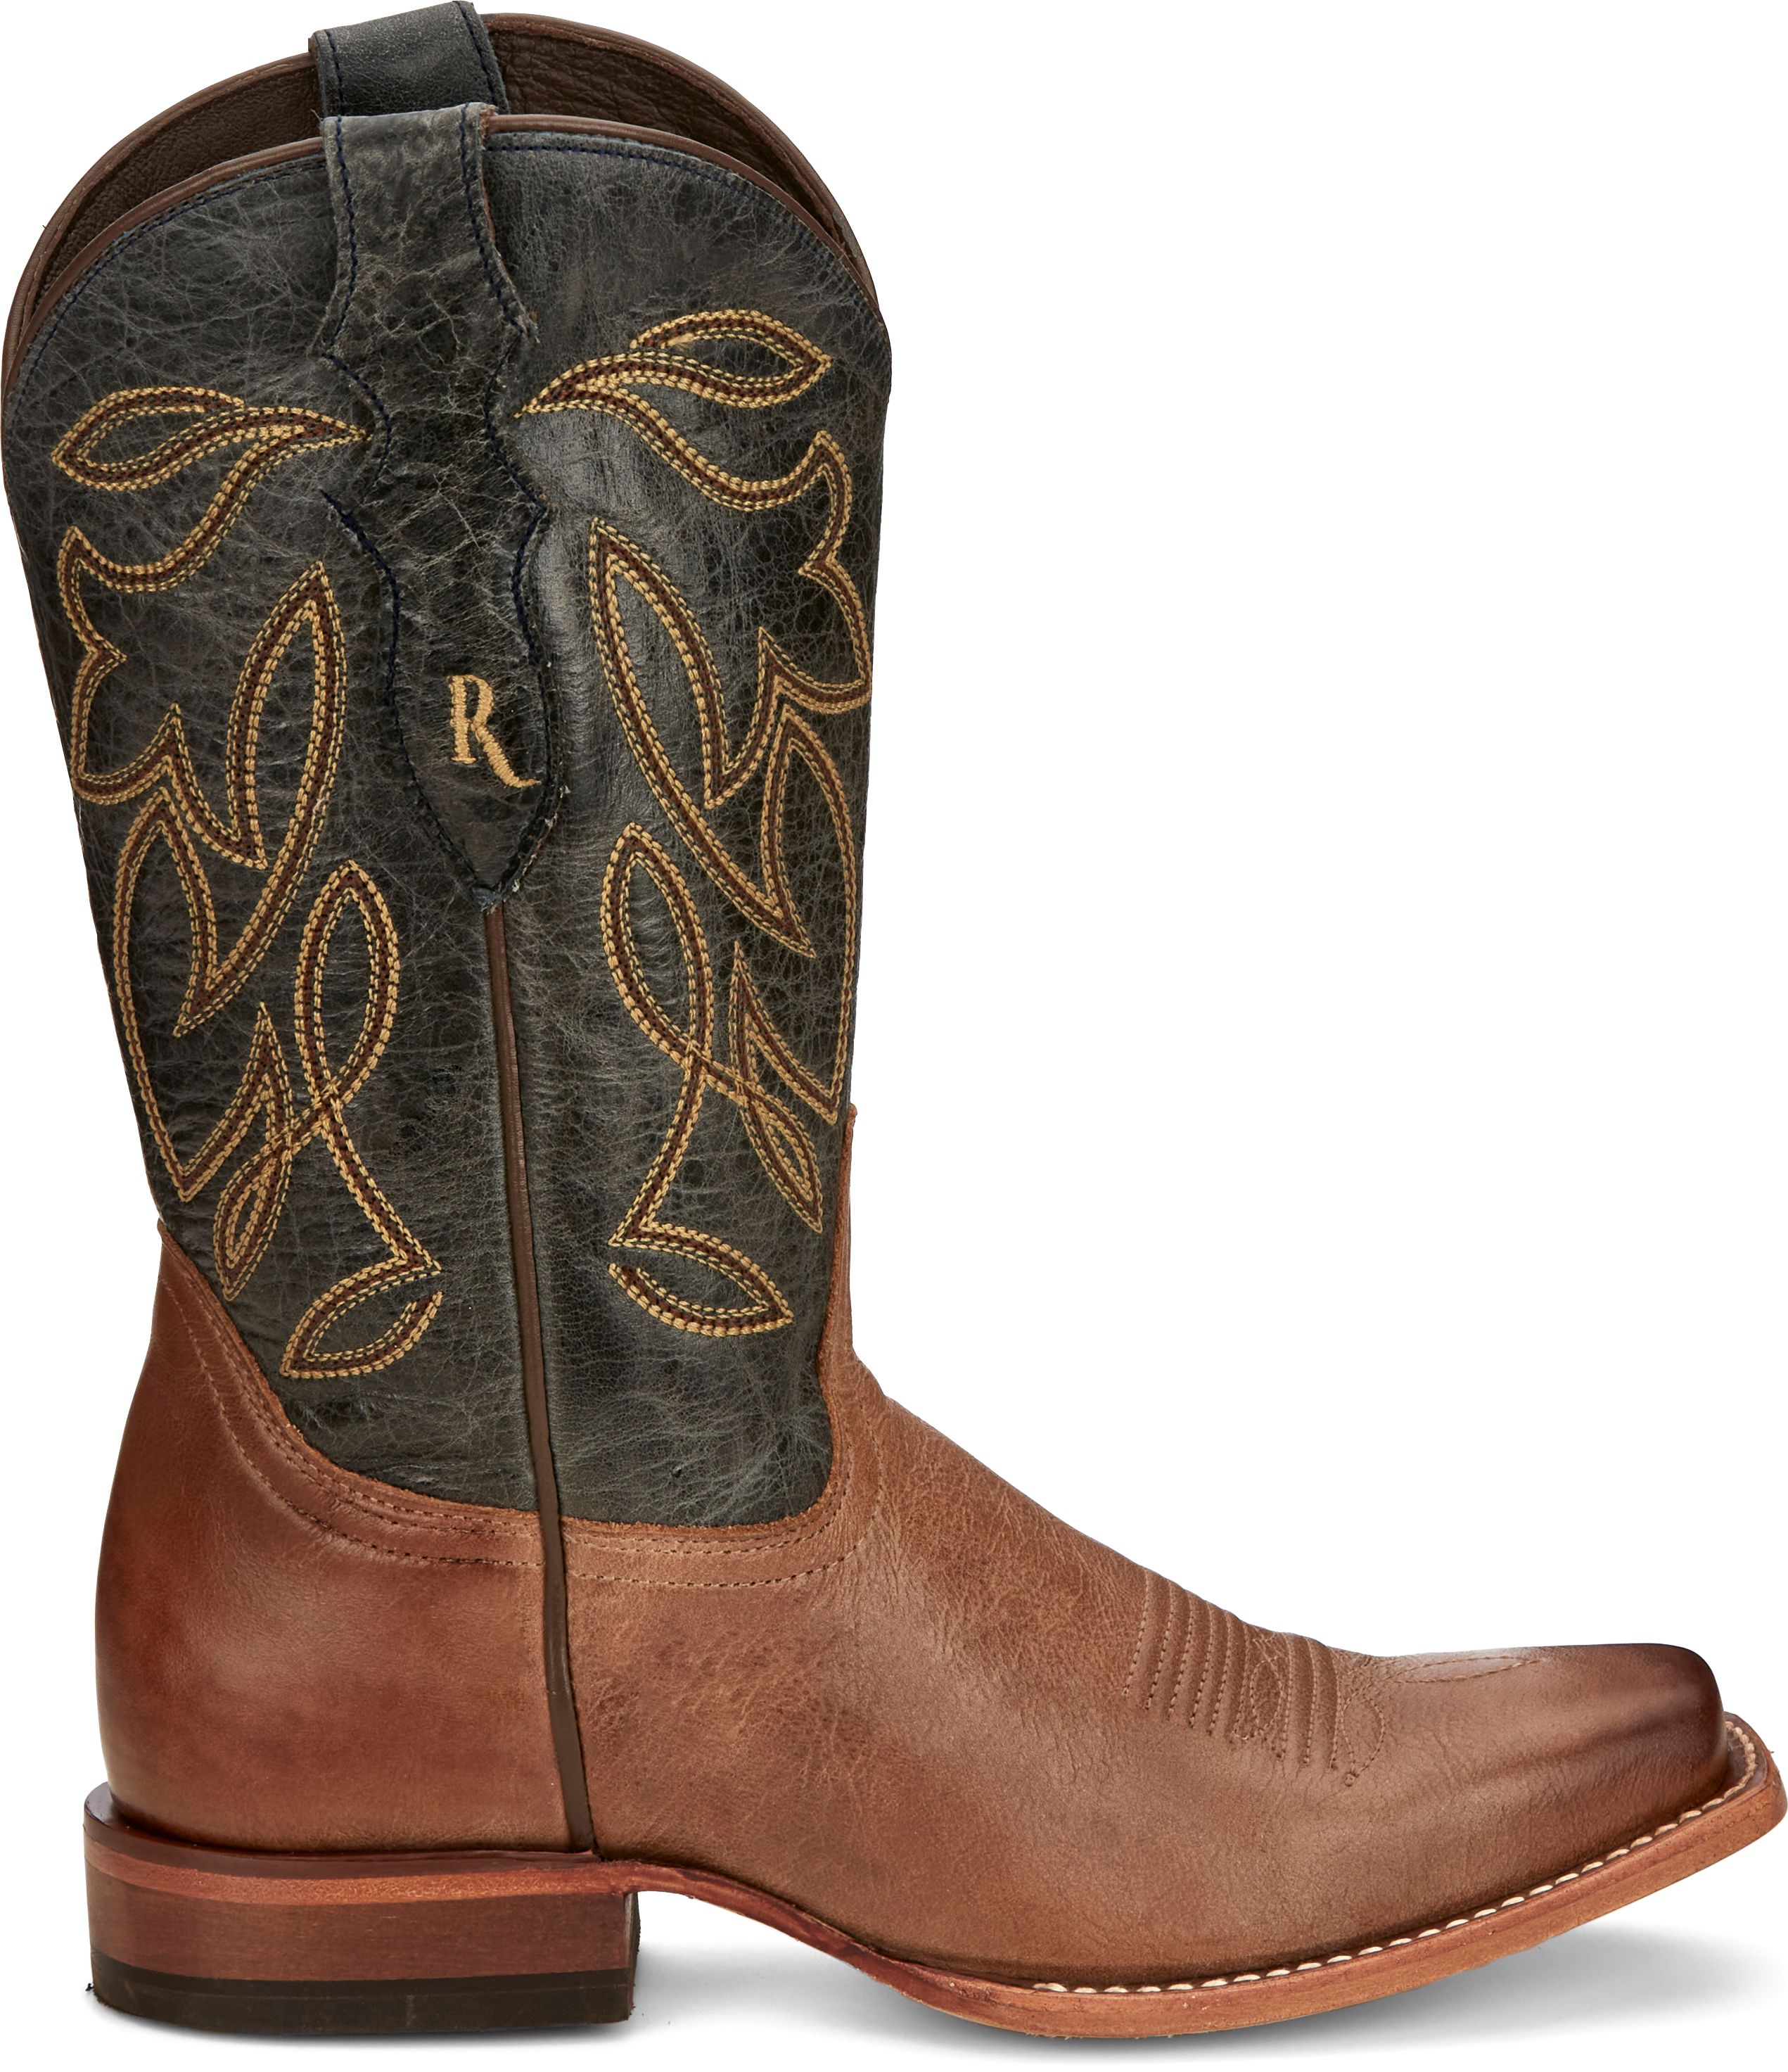 Reba by Justin Presents a New Traditional Boot to the Line